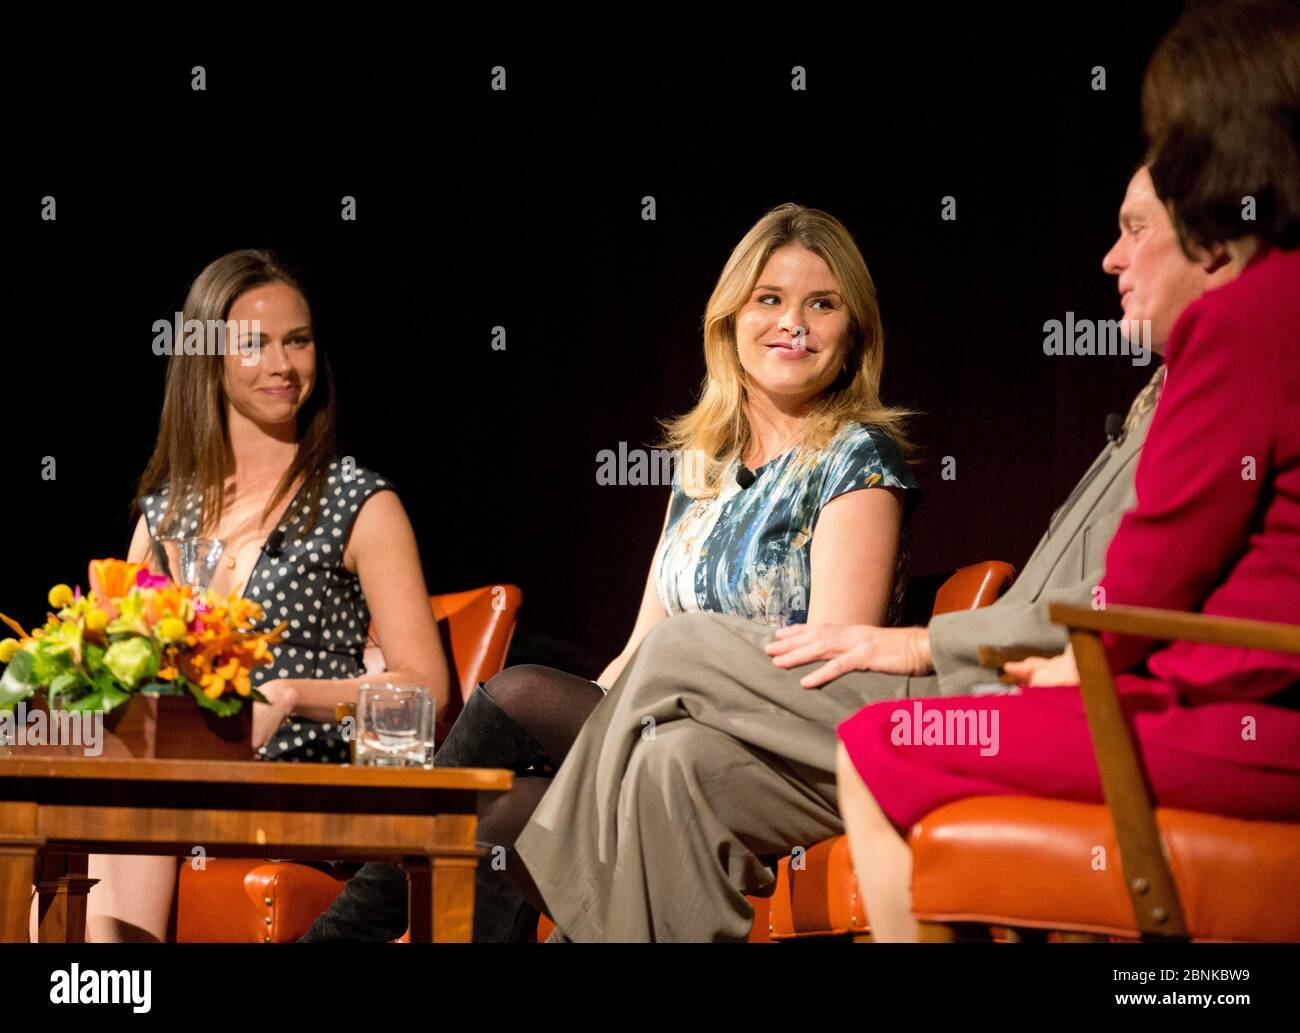 Austin Texas USA, November 15, 2012: Fraternal twins Barbara Bush (left) and Jenna Bush Hager, daughters of former Pres. George W. Bush, and Steve Ford, son of former Pres. Gerald Ford, talk about life in the White House as some of the U.S. first children discuss their lives as part of a daylong seminar at the LBJ Library. ©Bob Daemmrich Stock Photo